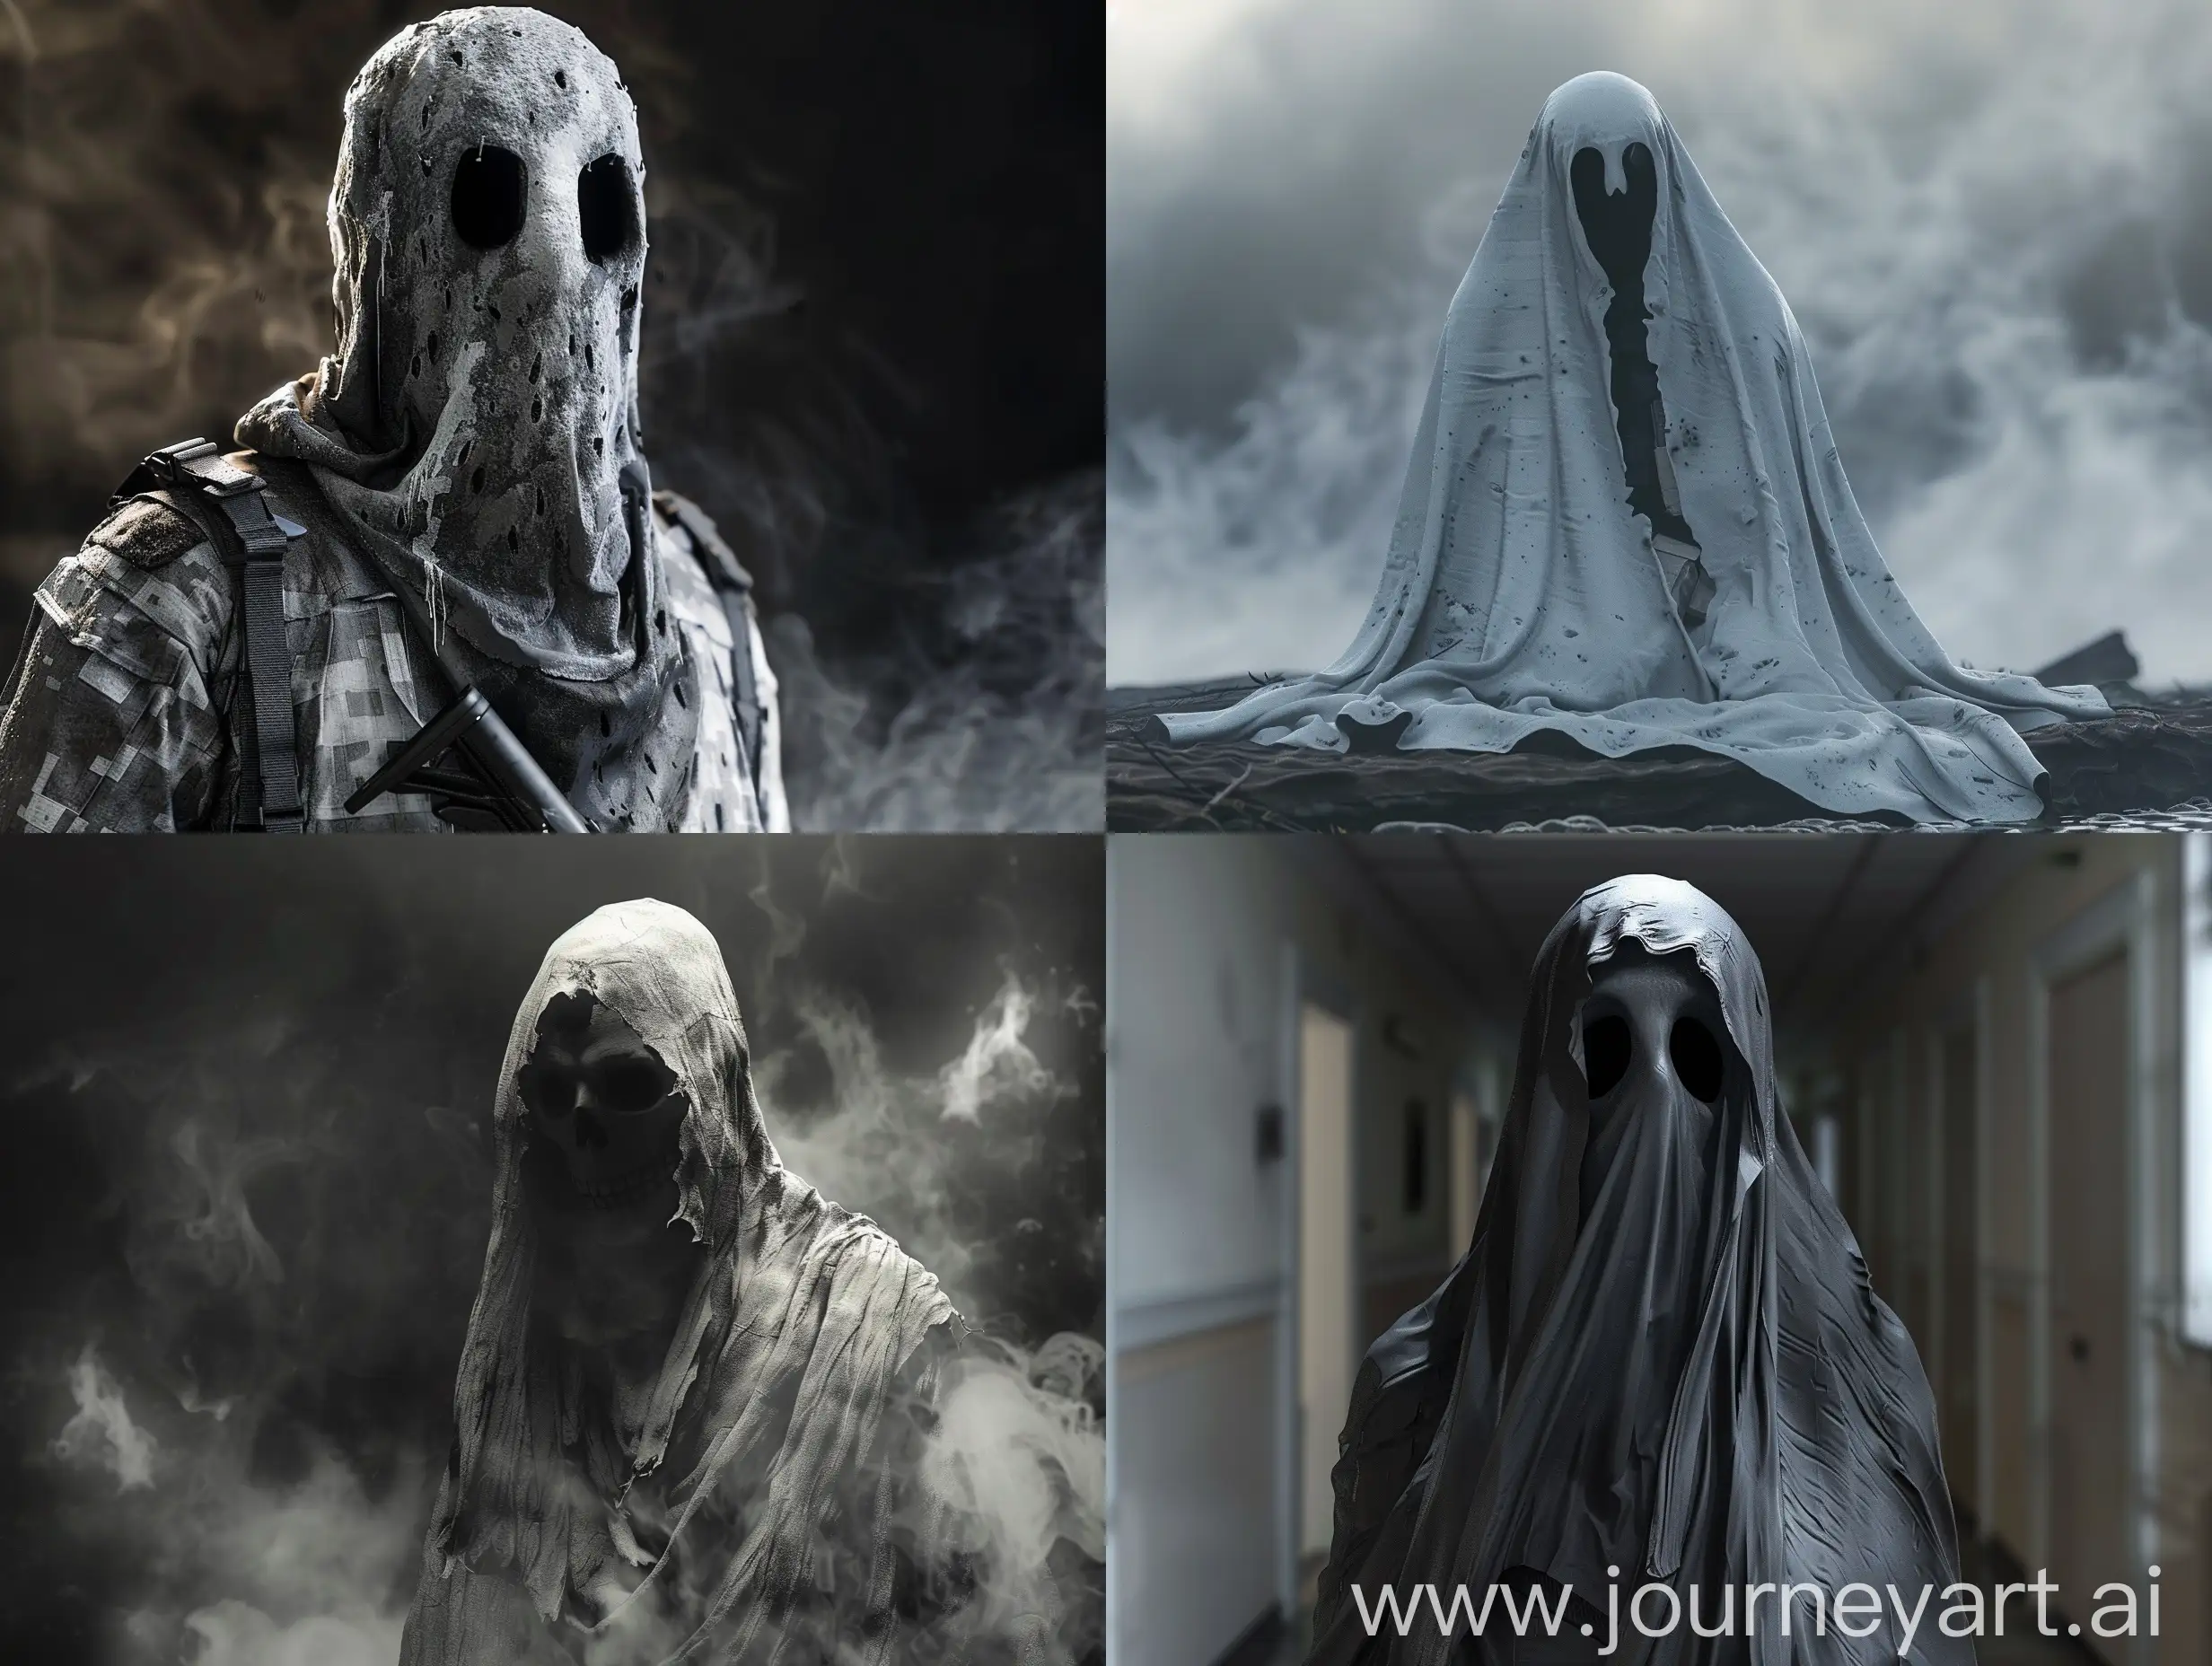 A photorealistic image of ghost from call of duty sad